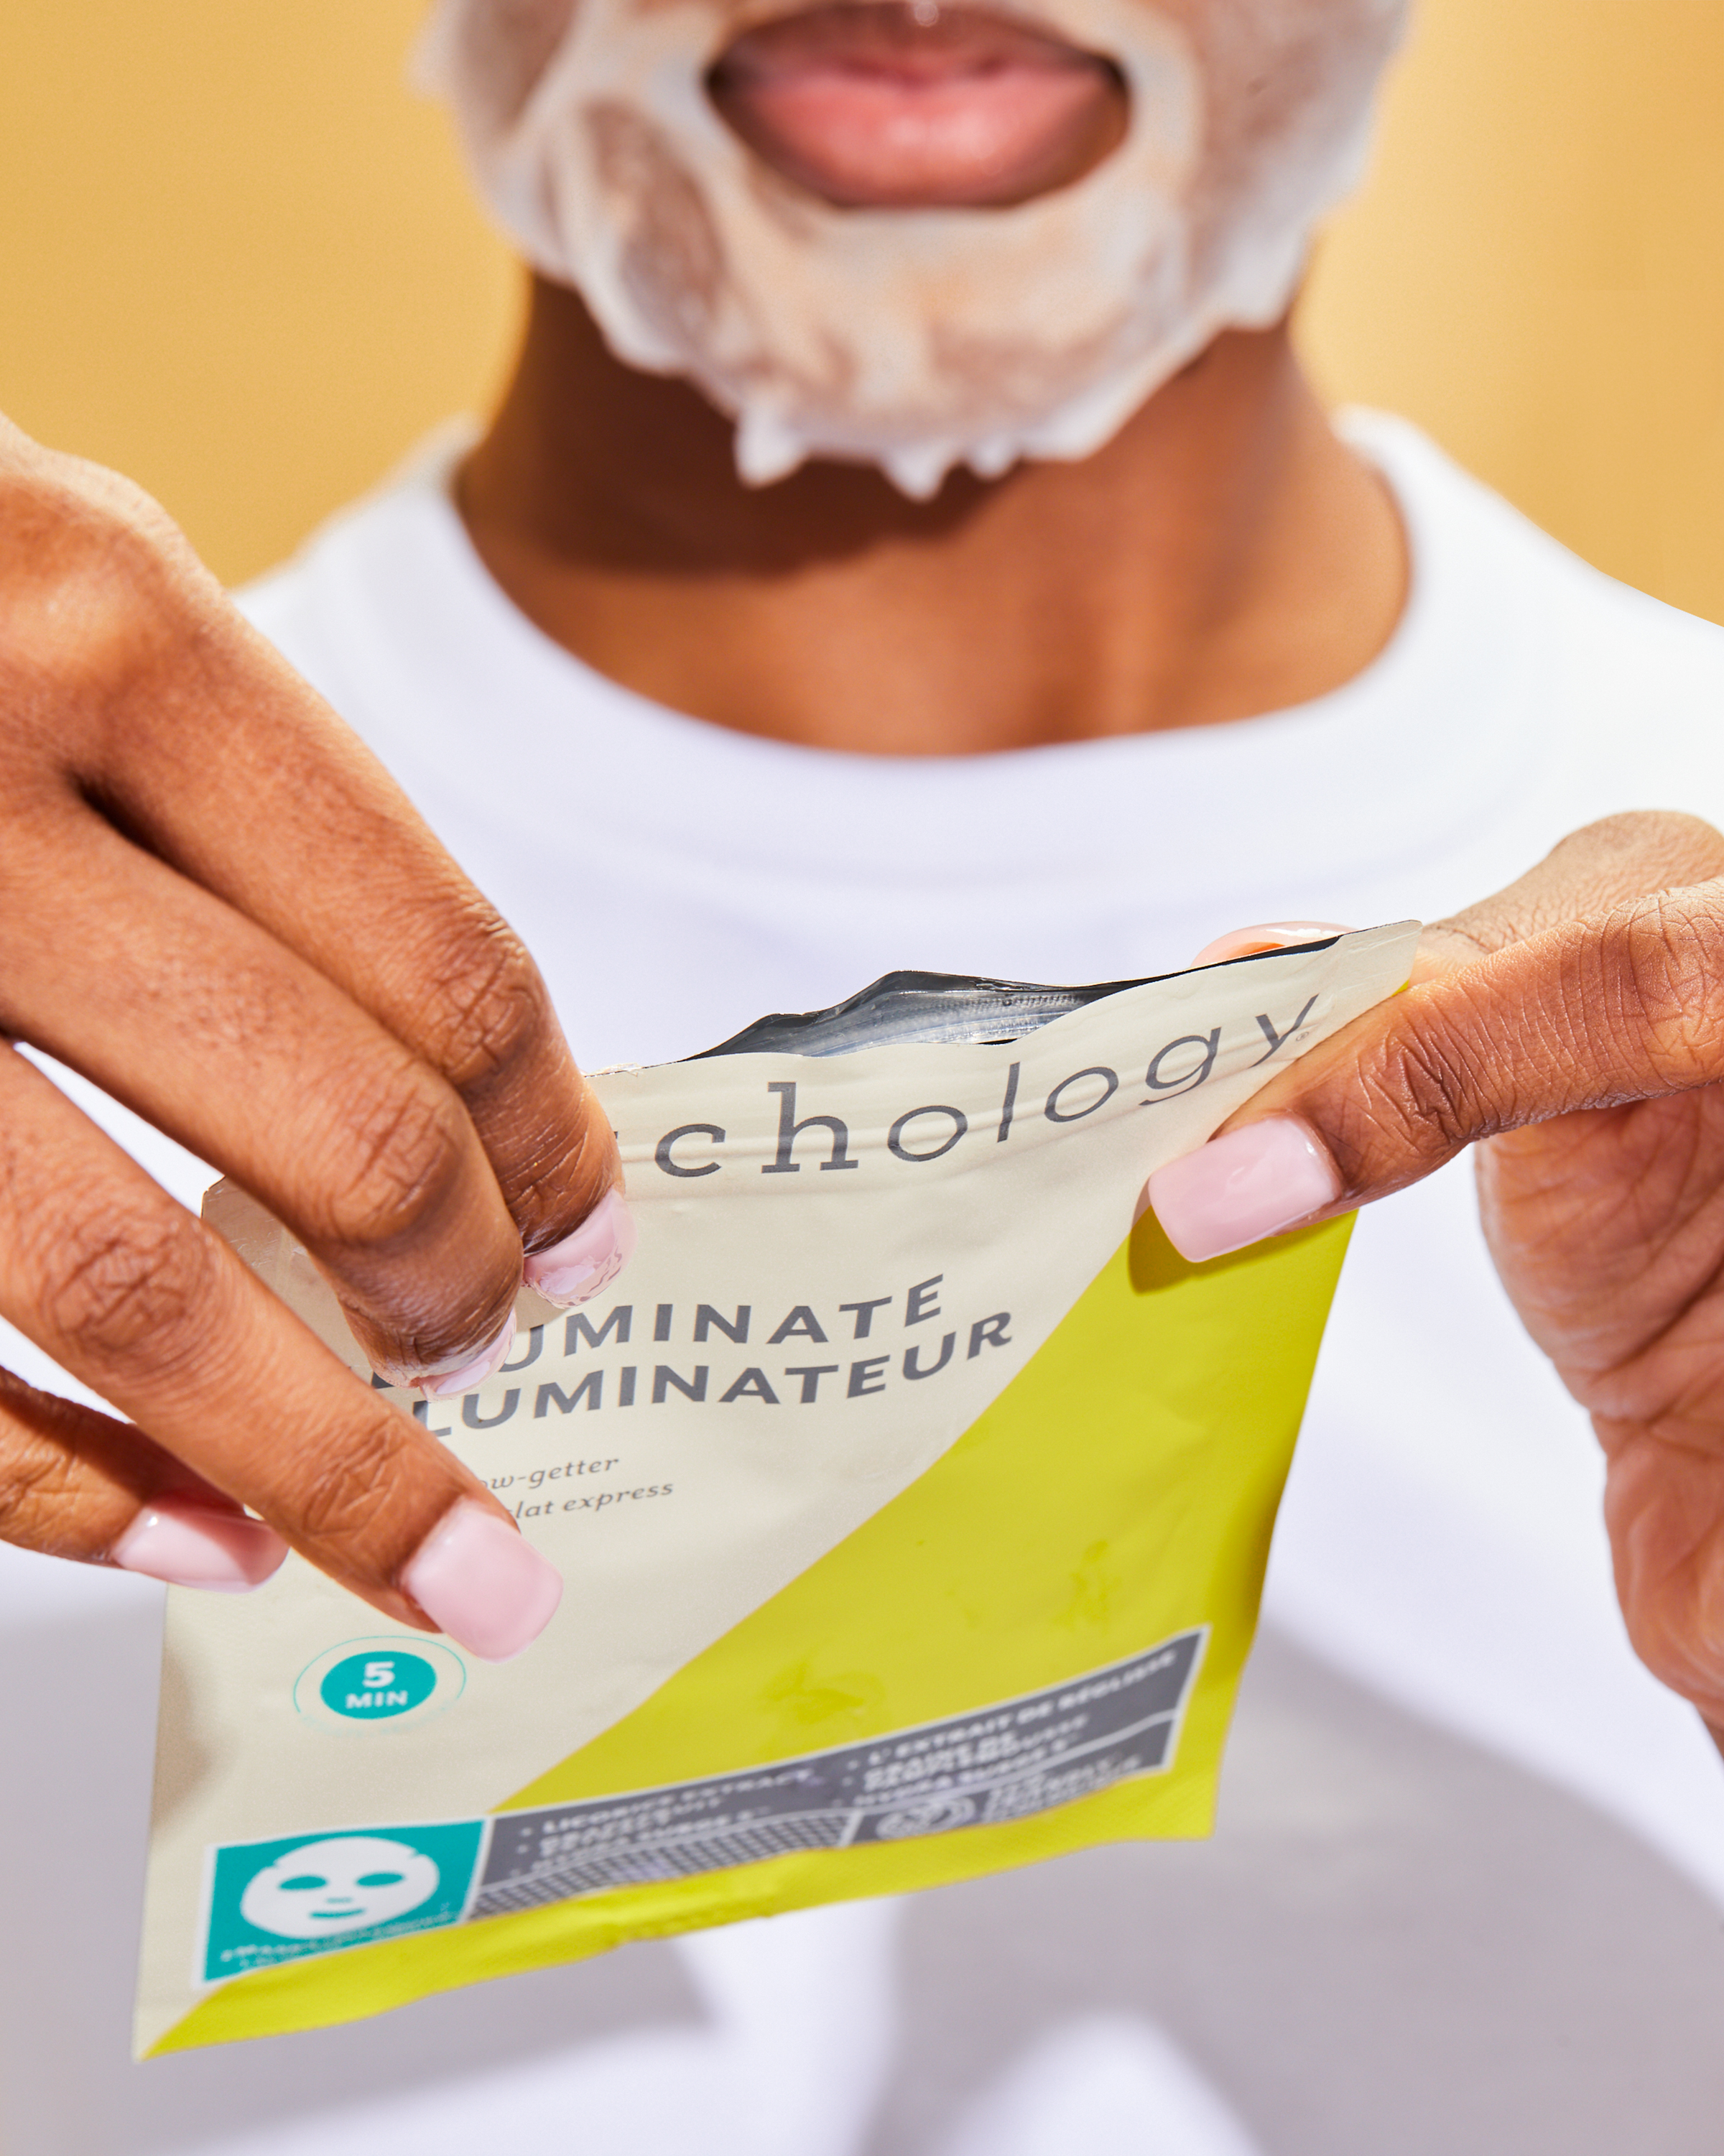 Patchology launches NEW eco-friendly and pocket-friendly 2-pack sheet masks - beautifuljobs